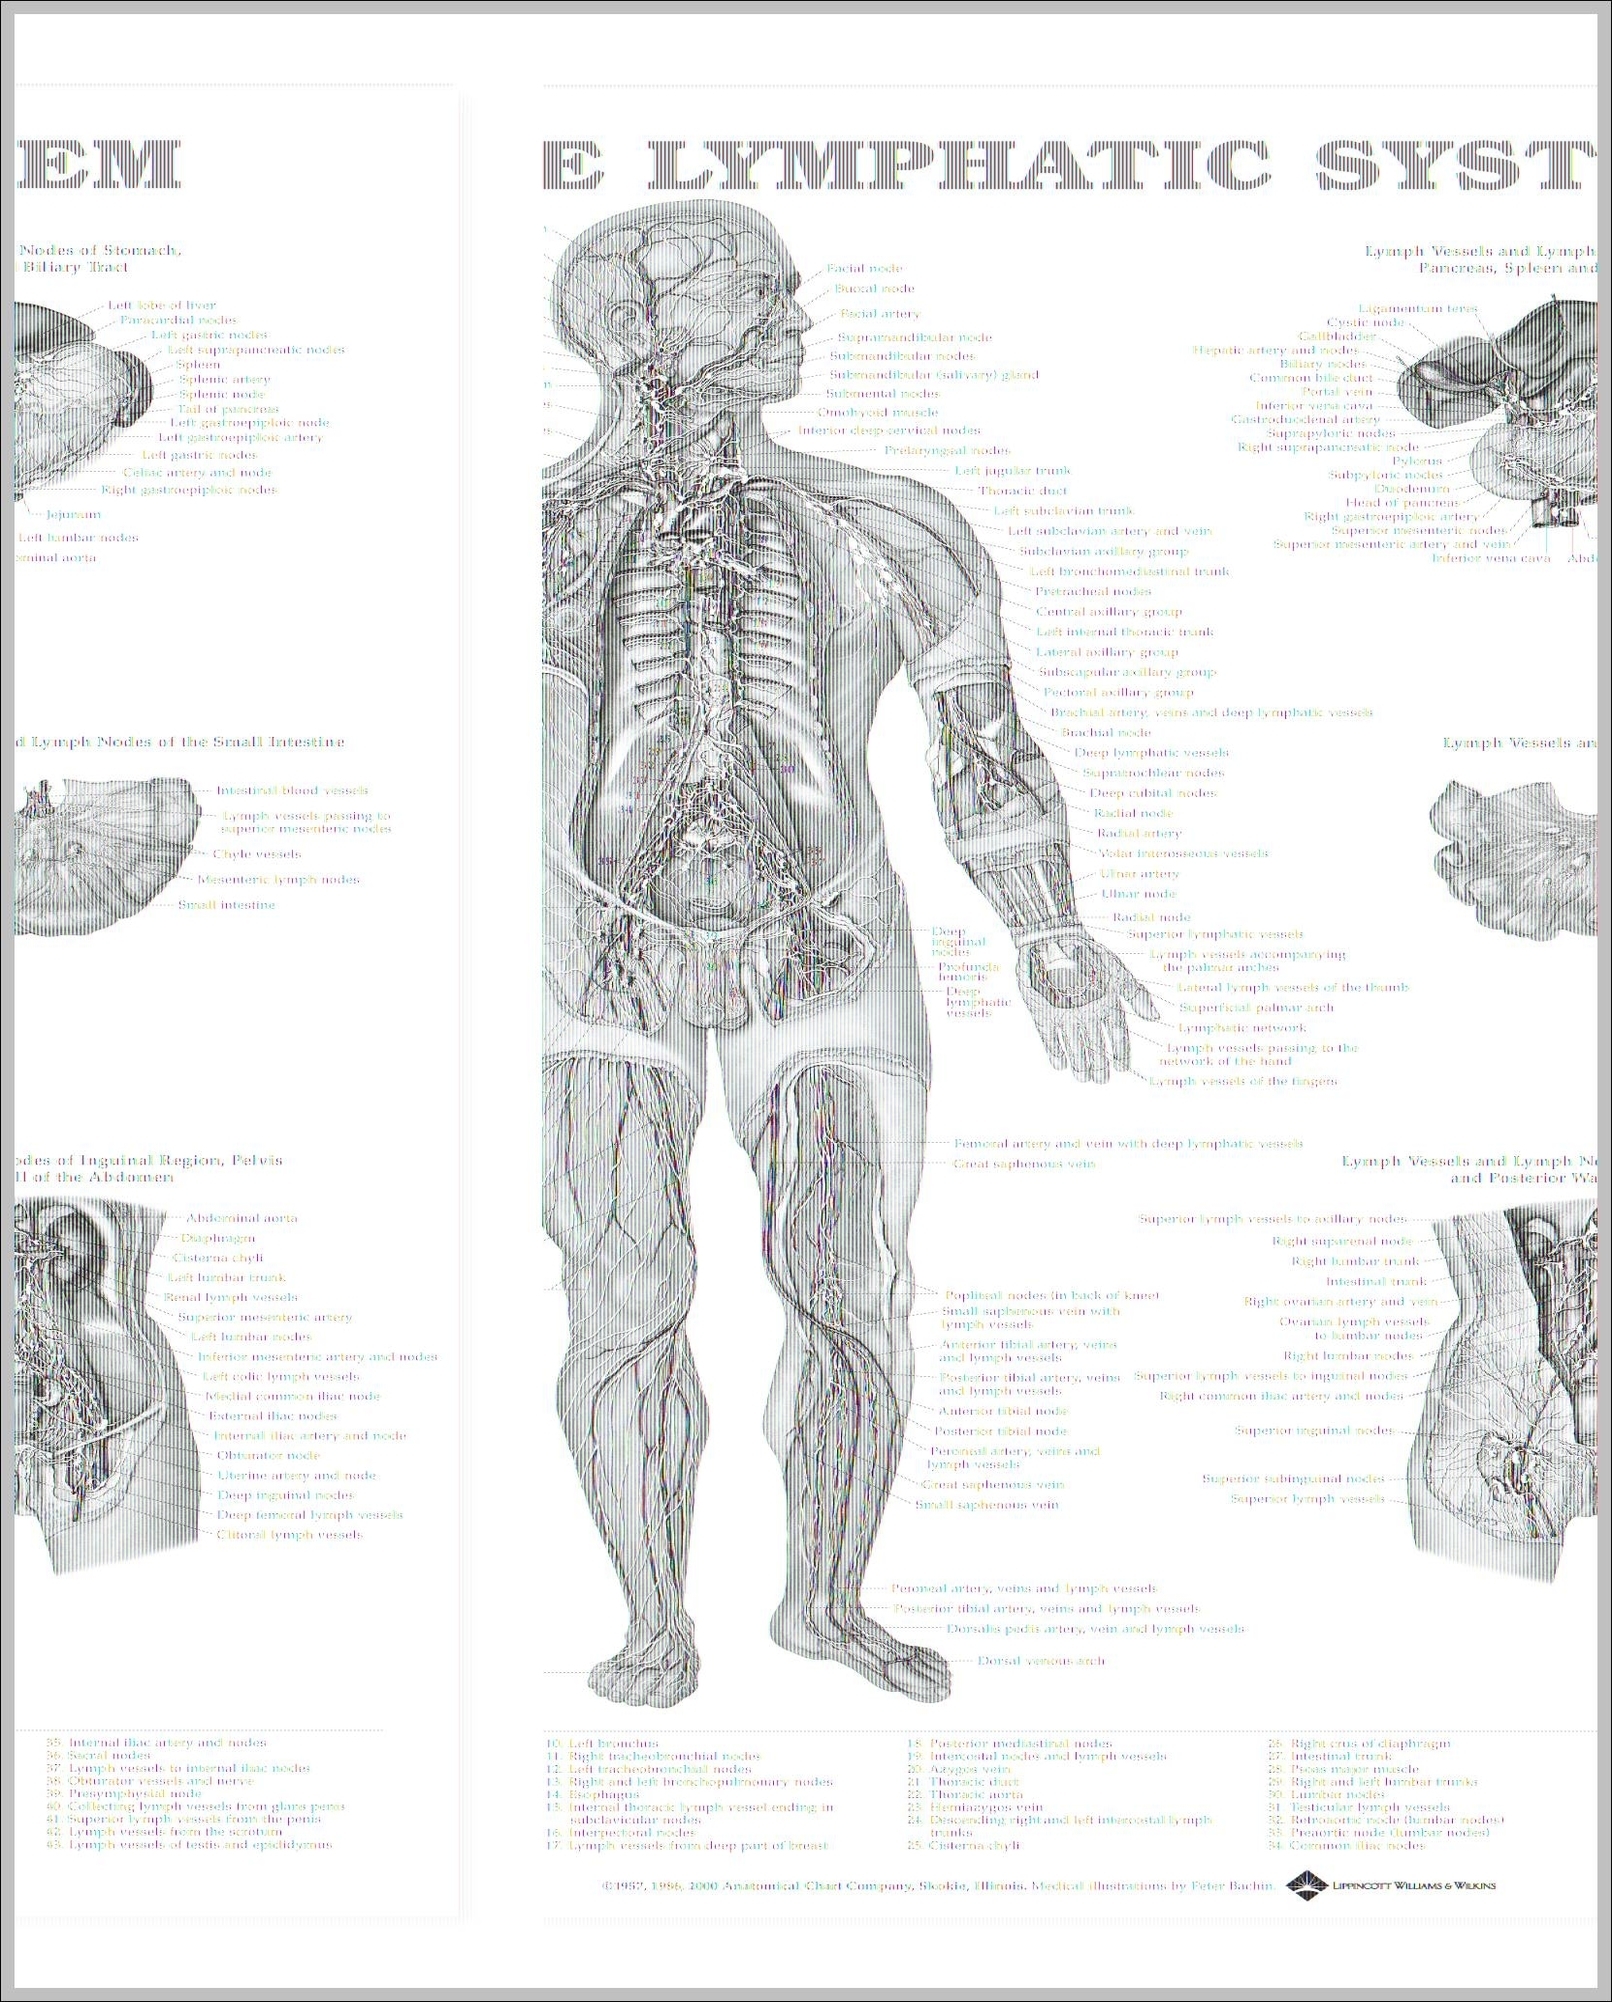 lymphatic system pictures